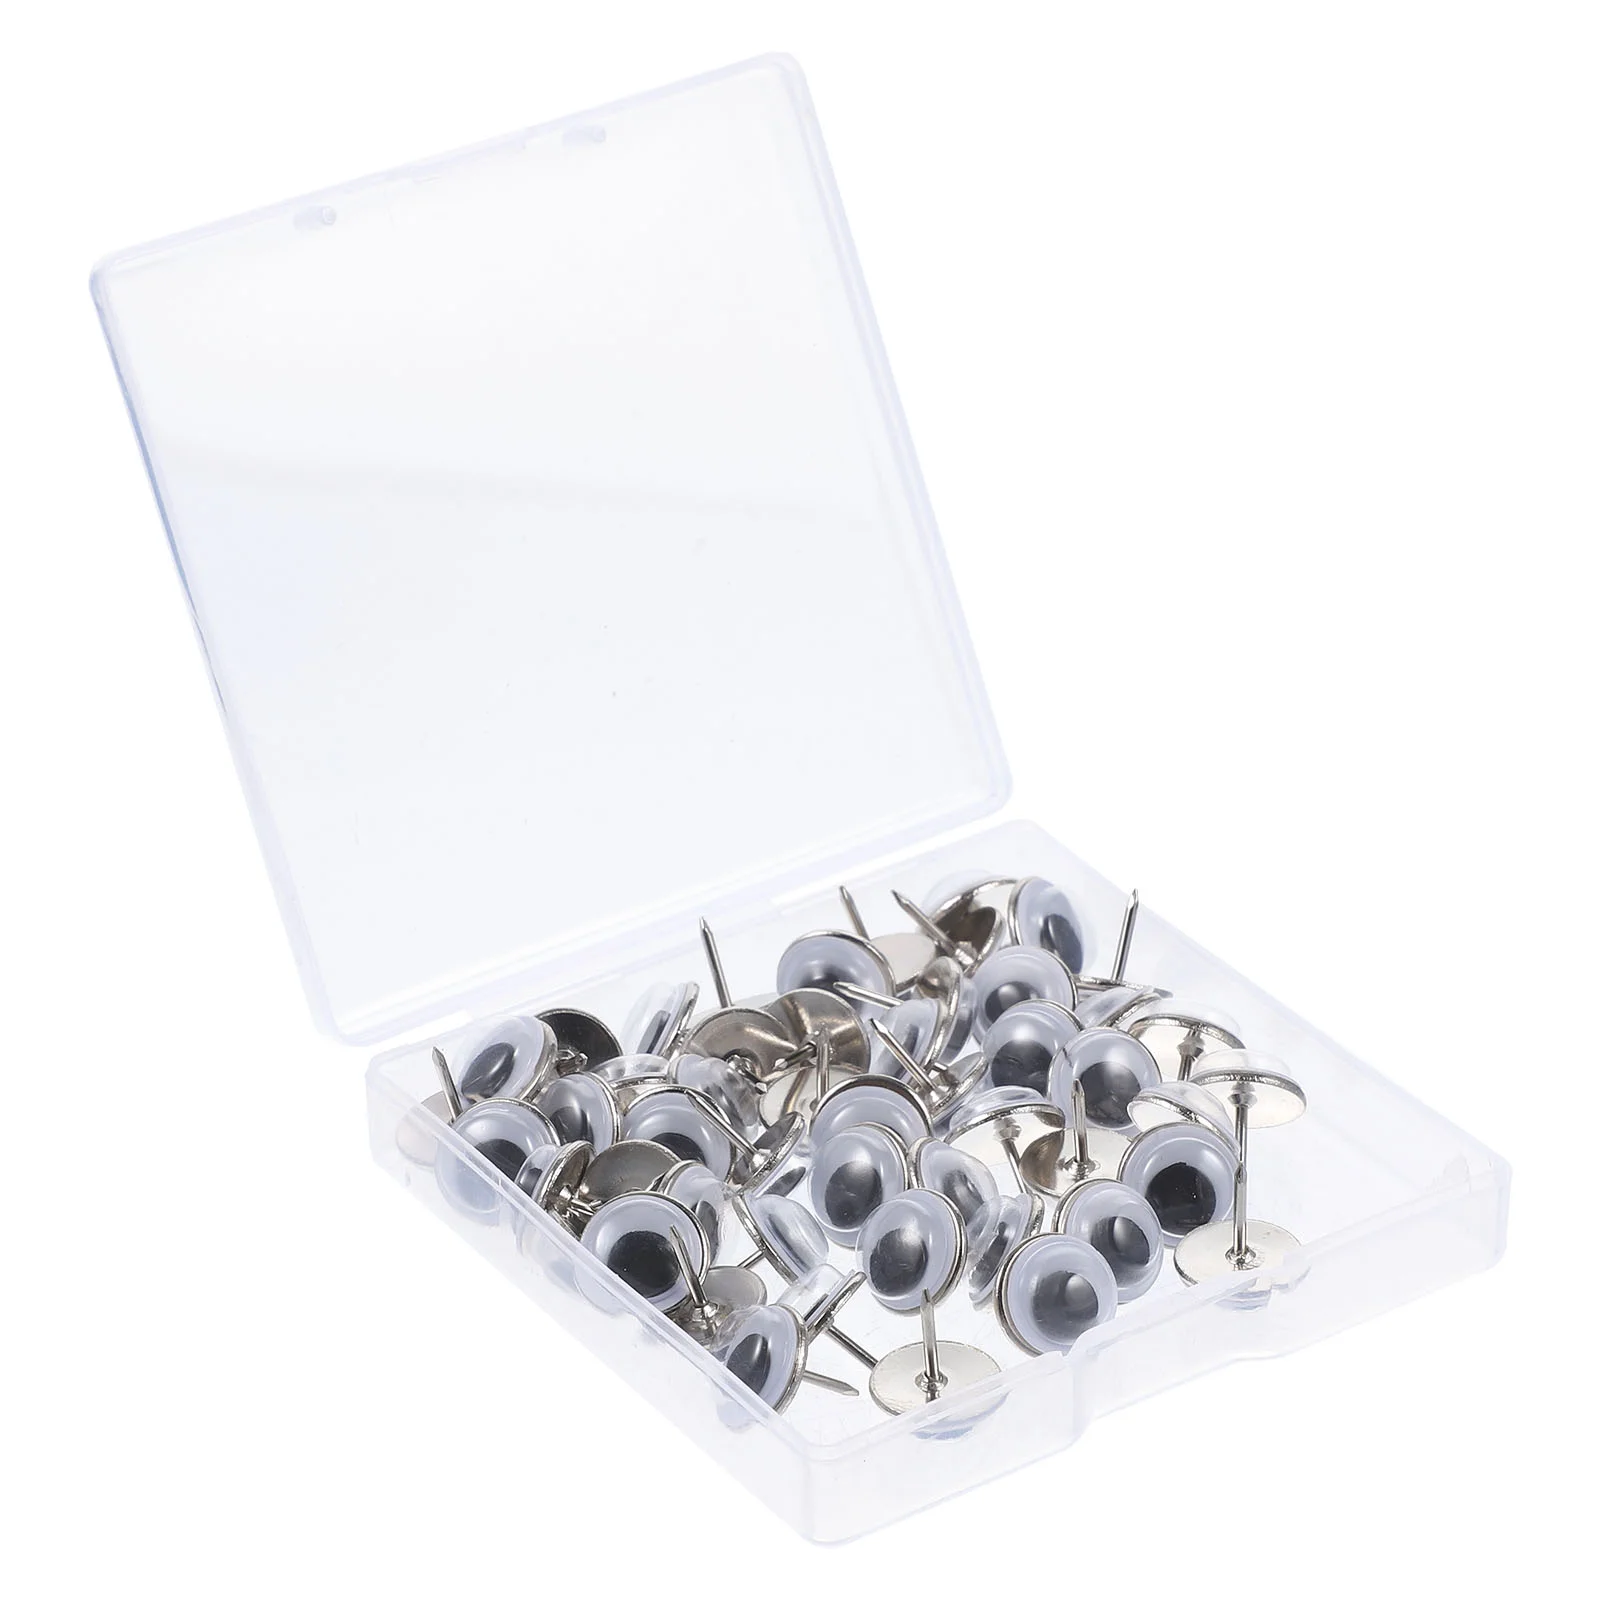 

50 Pcs Office Supply Push Pins Sunflower Decor for Household Eye Shaped Pushpins Plastic Supplies